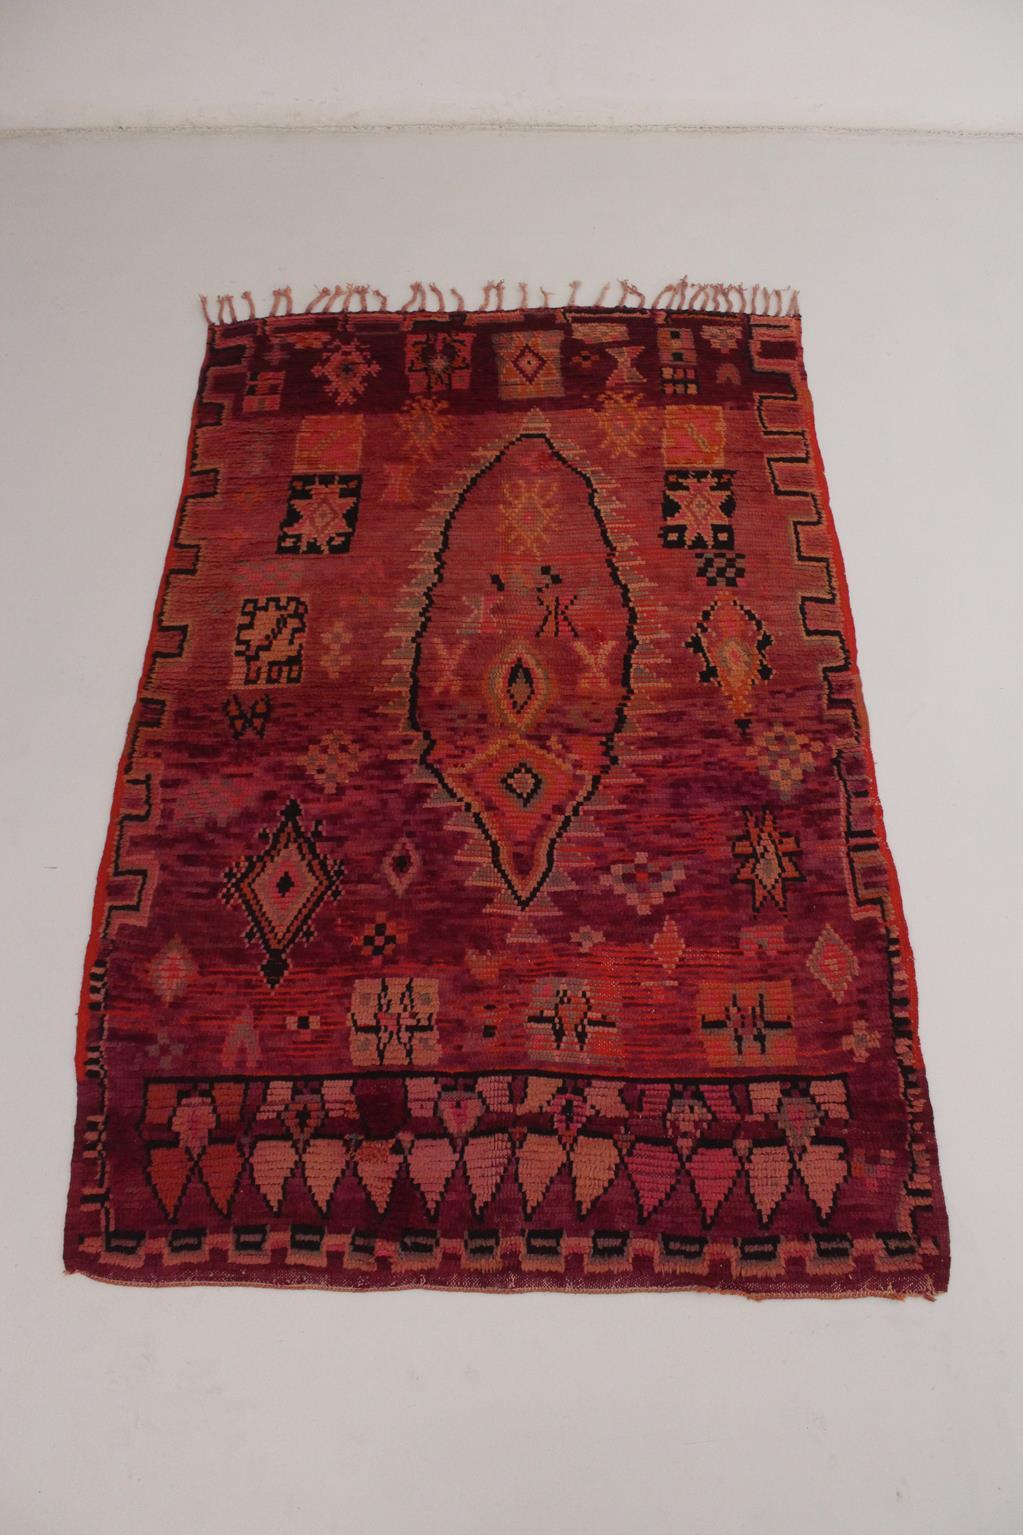 This beautiful vintage Boujad rug is a collector rug! It shows bright colors and a great composition made of traditional designs like diamonds, stars and crosses surrounding the main feminine design in the middle. The whole rug is so vibrant with